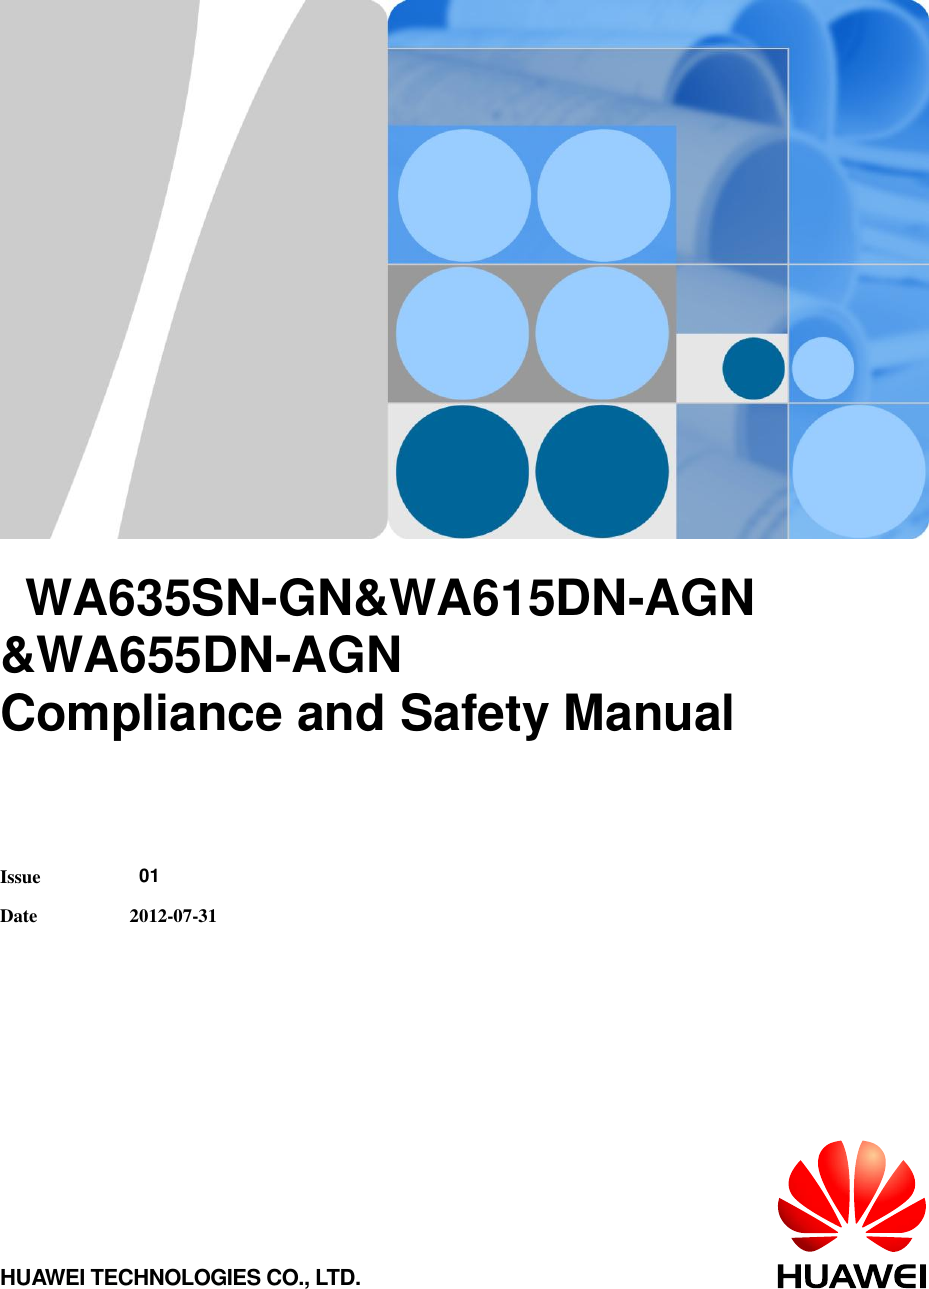           WA635SN-GN&amp;WA615DN-AGN &amp;WA655DN-AGN   Compliance and Safety Manual   Issue  01 Date 2012-07-31 HUAWEI TECHNOLOGIES CO., LTD. 